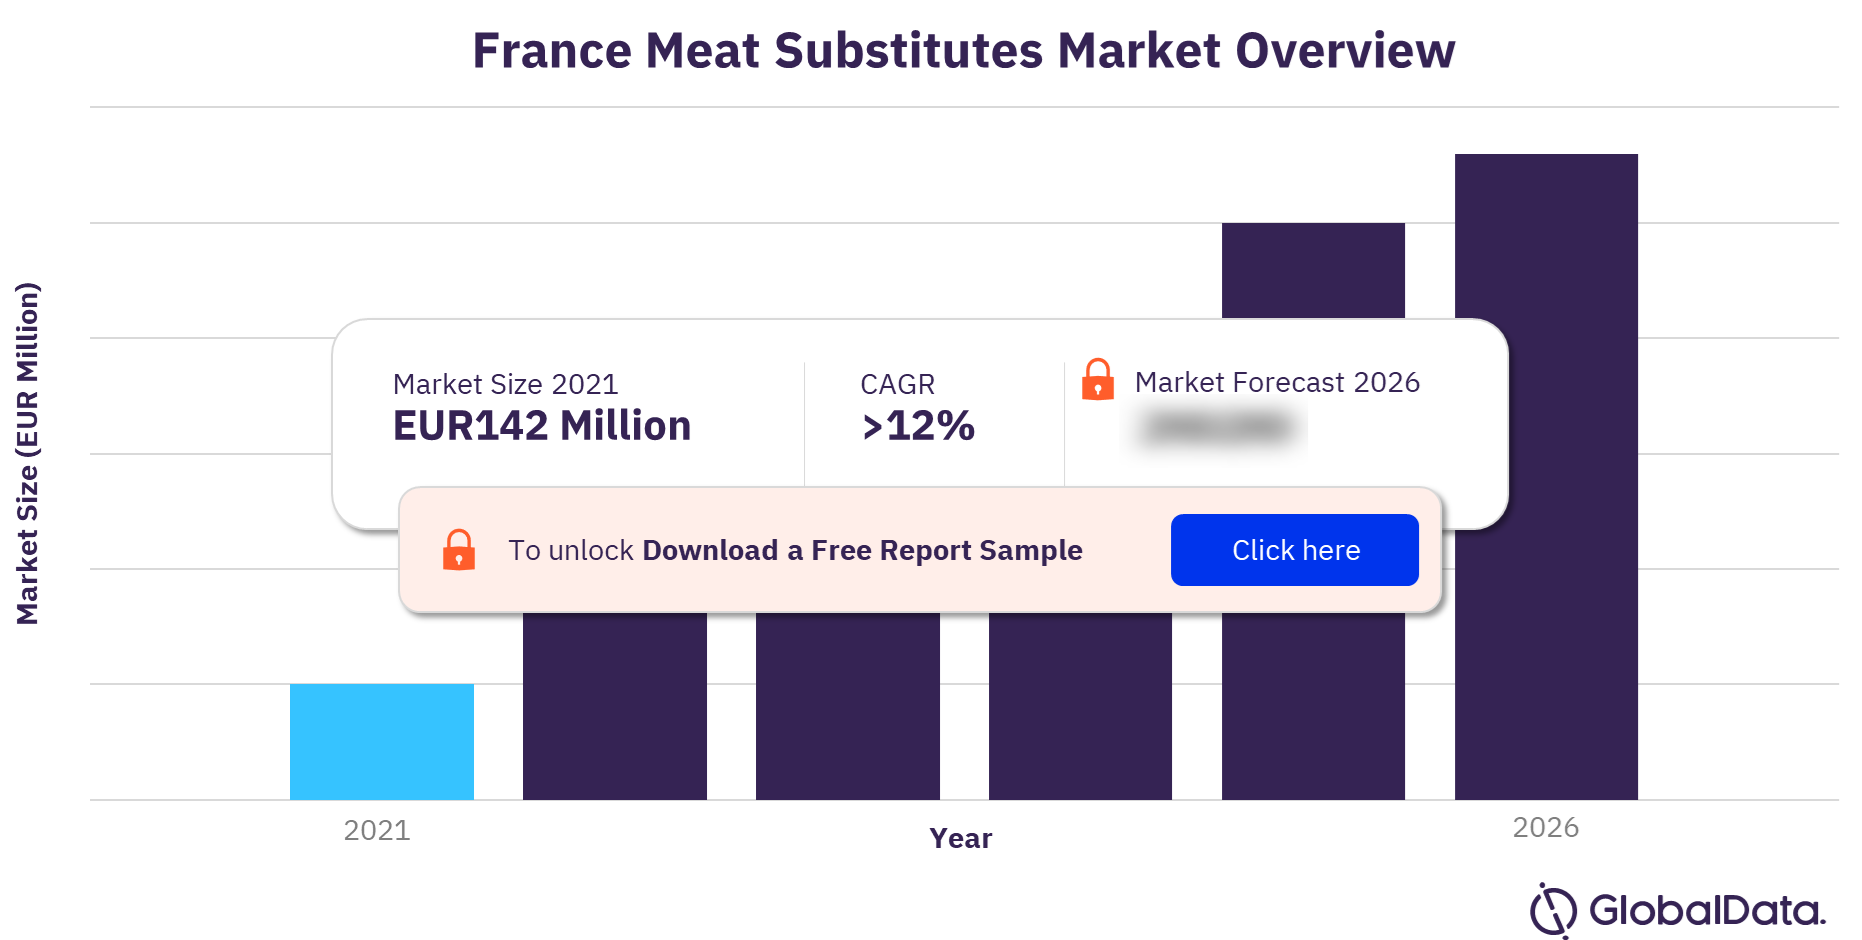 France Meat Substitutes Market Size 